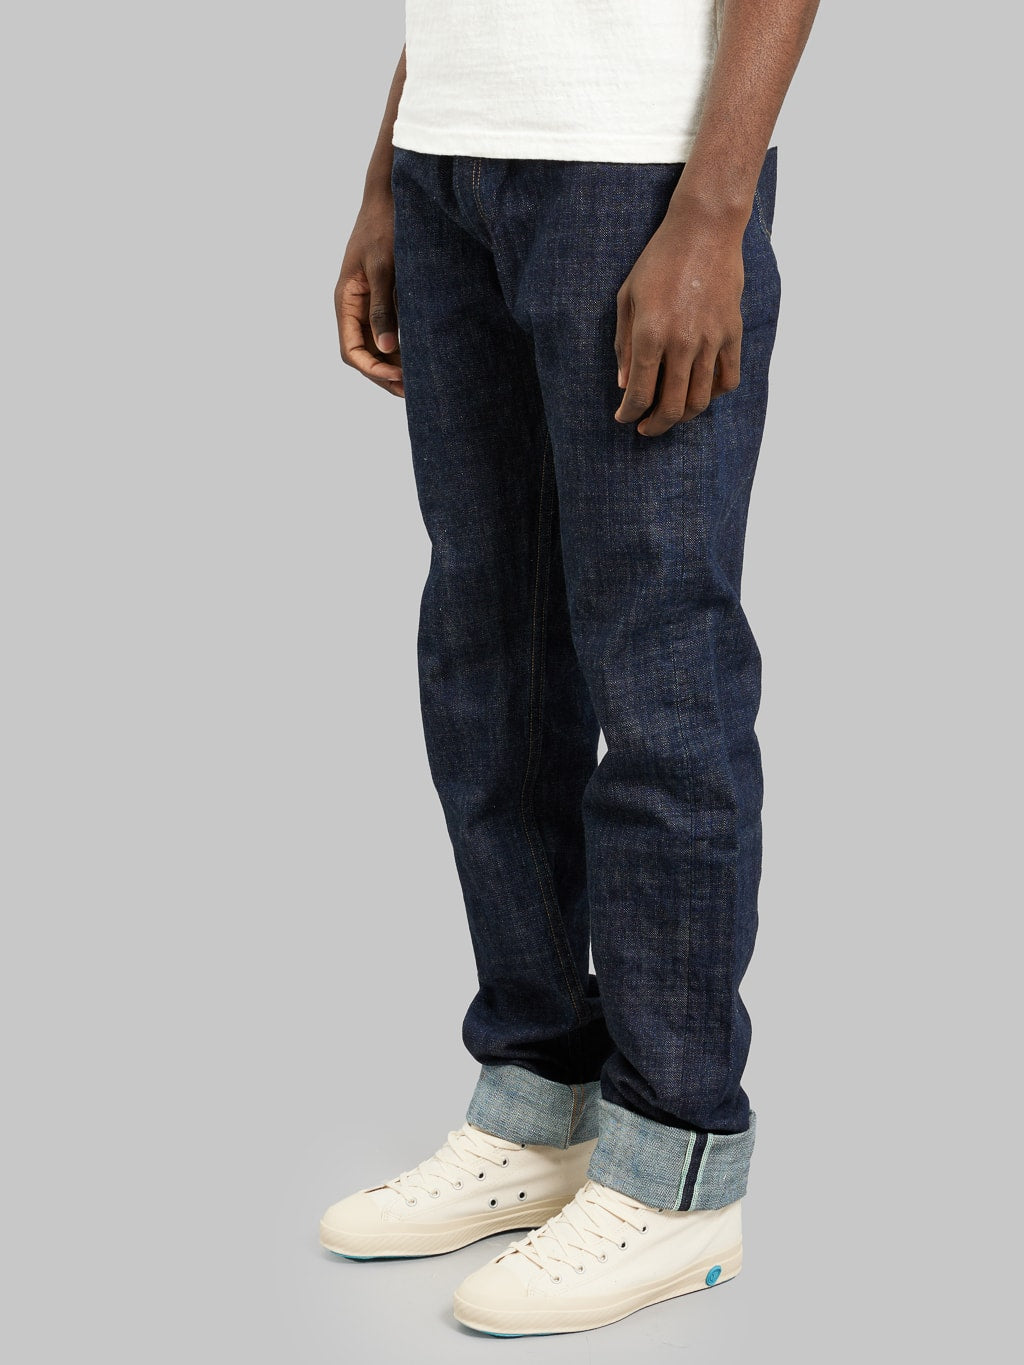 3sixteen CT 20th Anniversary Burkina Faso Classic Tapered Jeans side fit